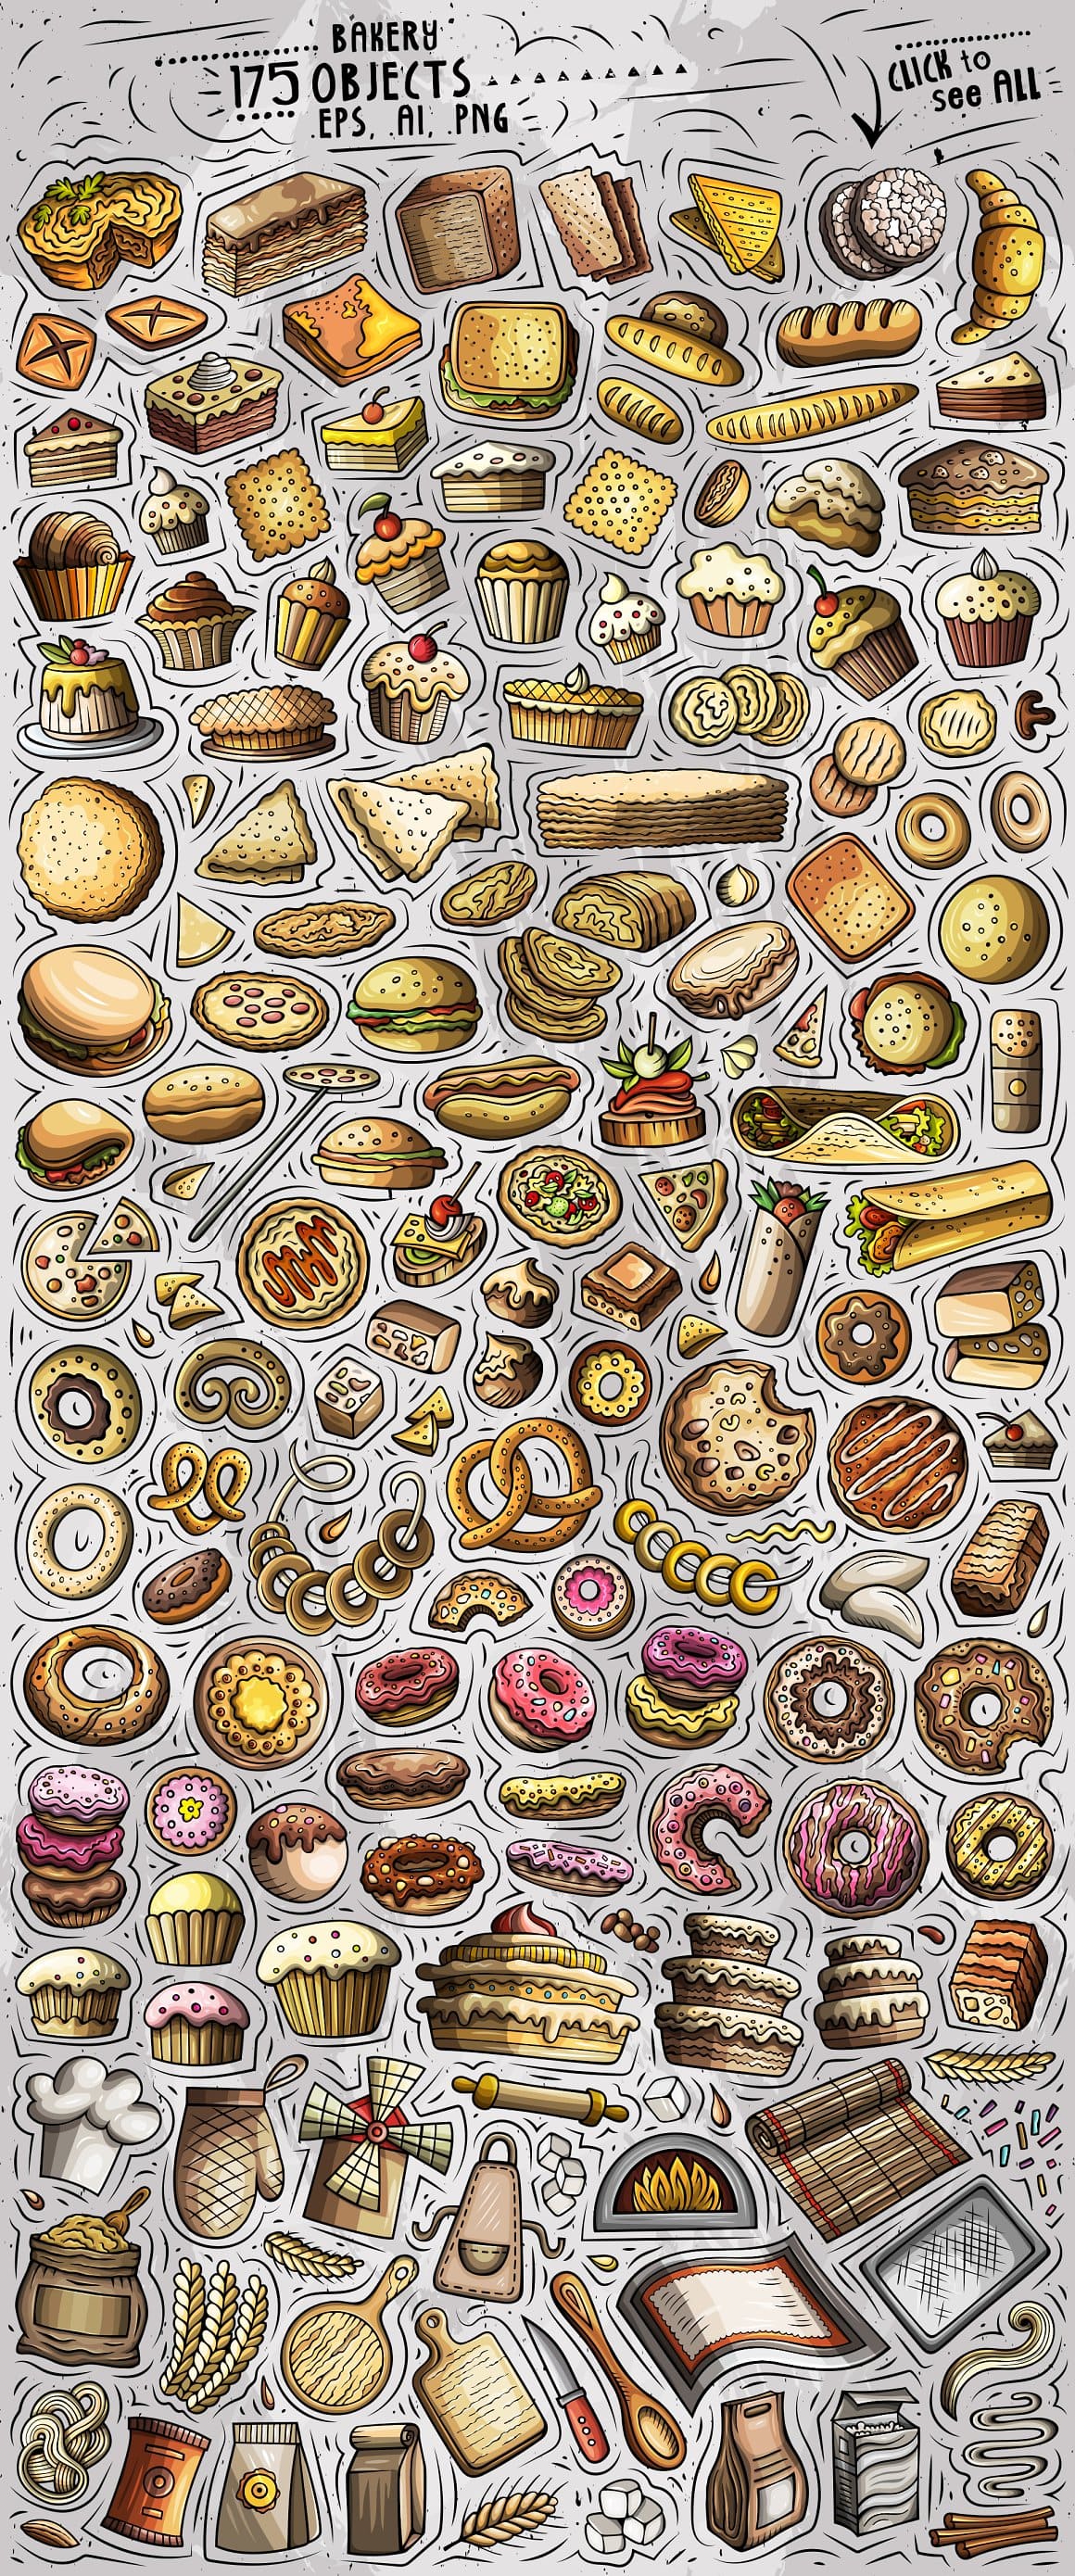 Bakery Products Cartoon Objects Set Preview 2.